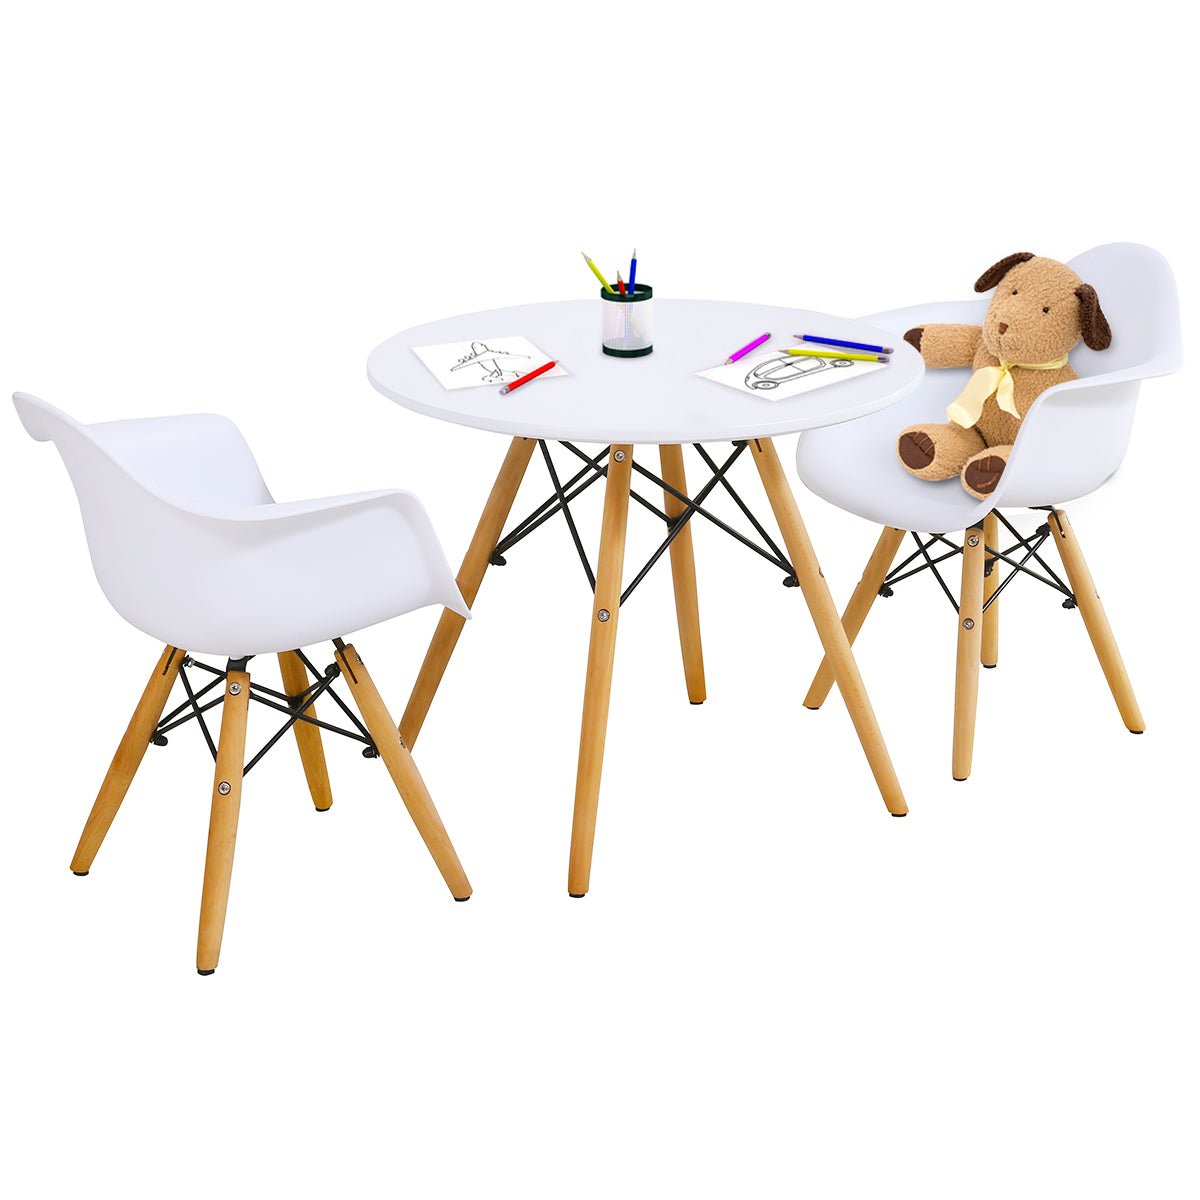 Learning and Play Hub: 3-Piece Children's Table and Chairs Set